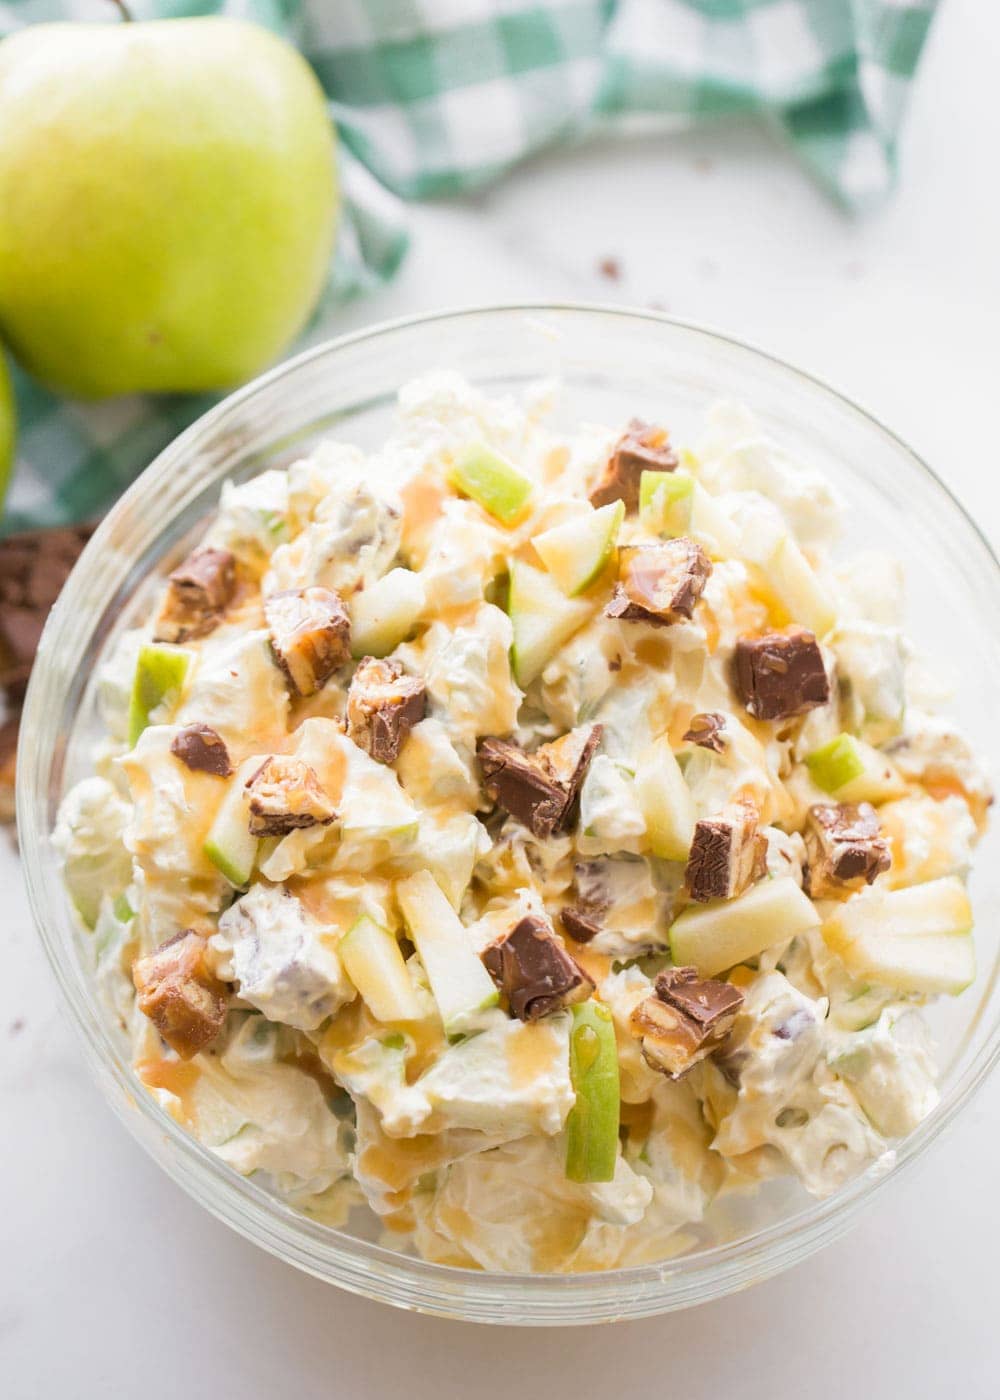 The best Snickers apple salad (+video)